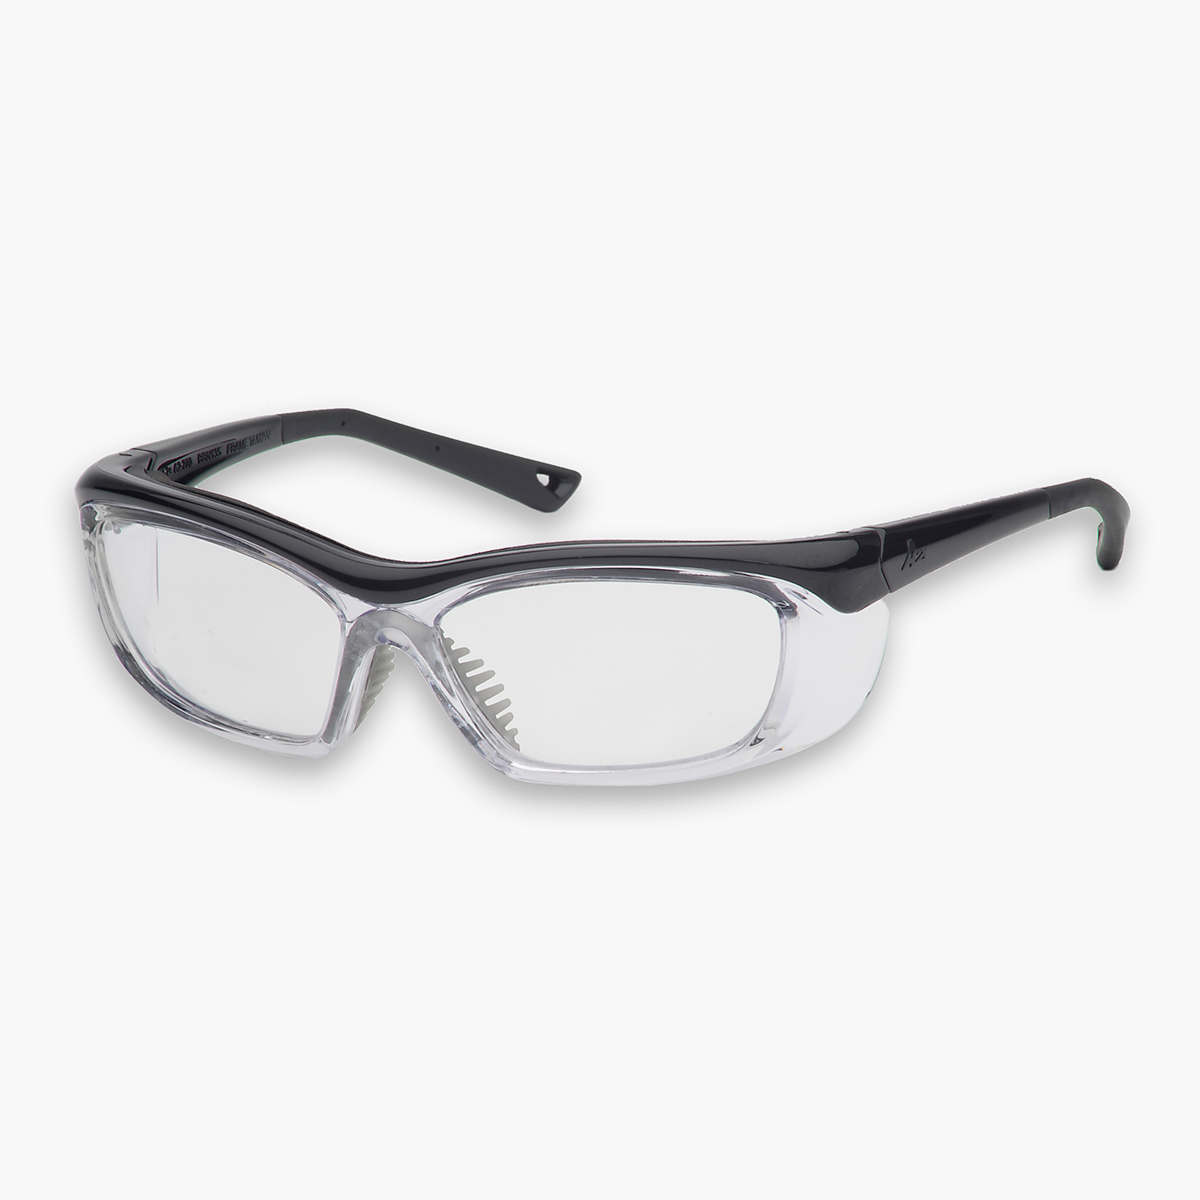 Prescription Safety Glasses Mens And Womens Sporty Modified Rectangle Frame